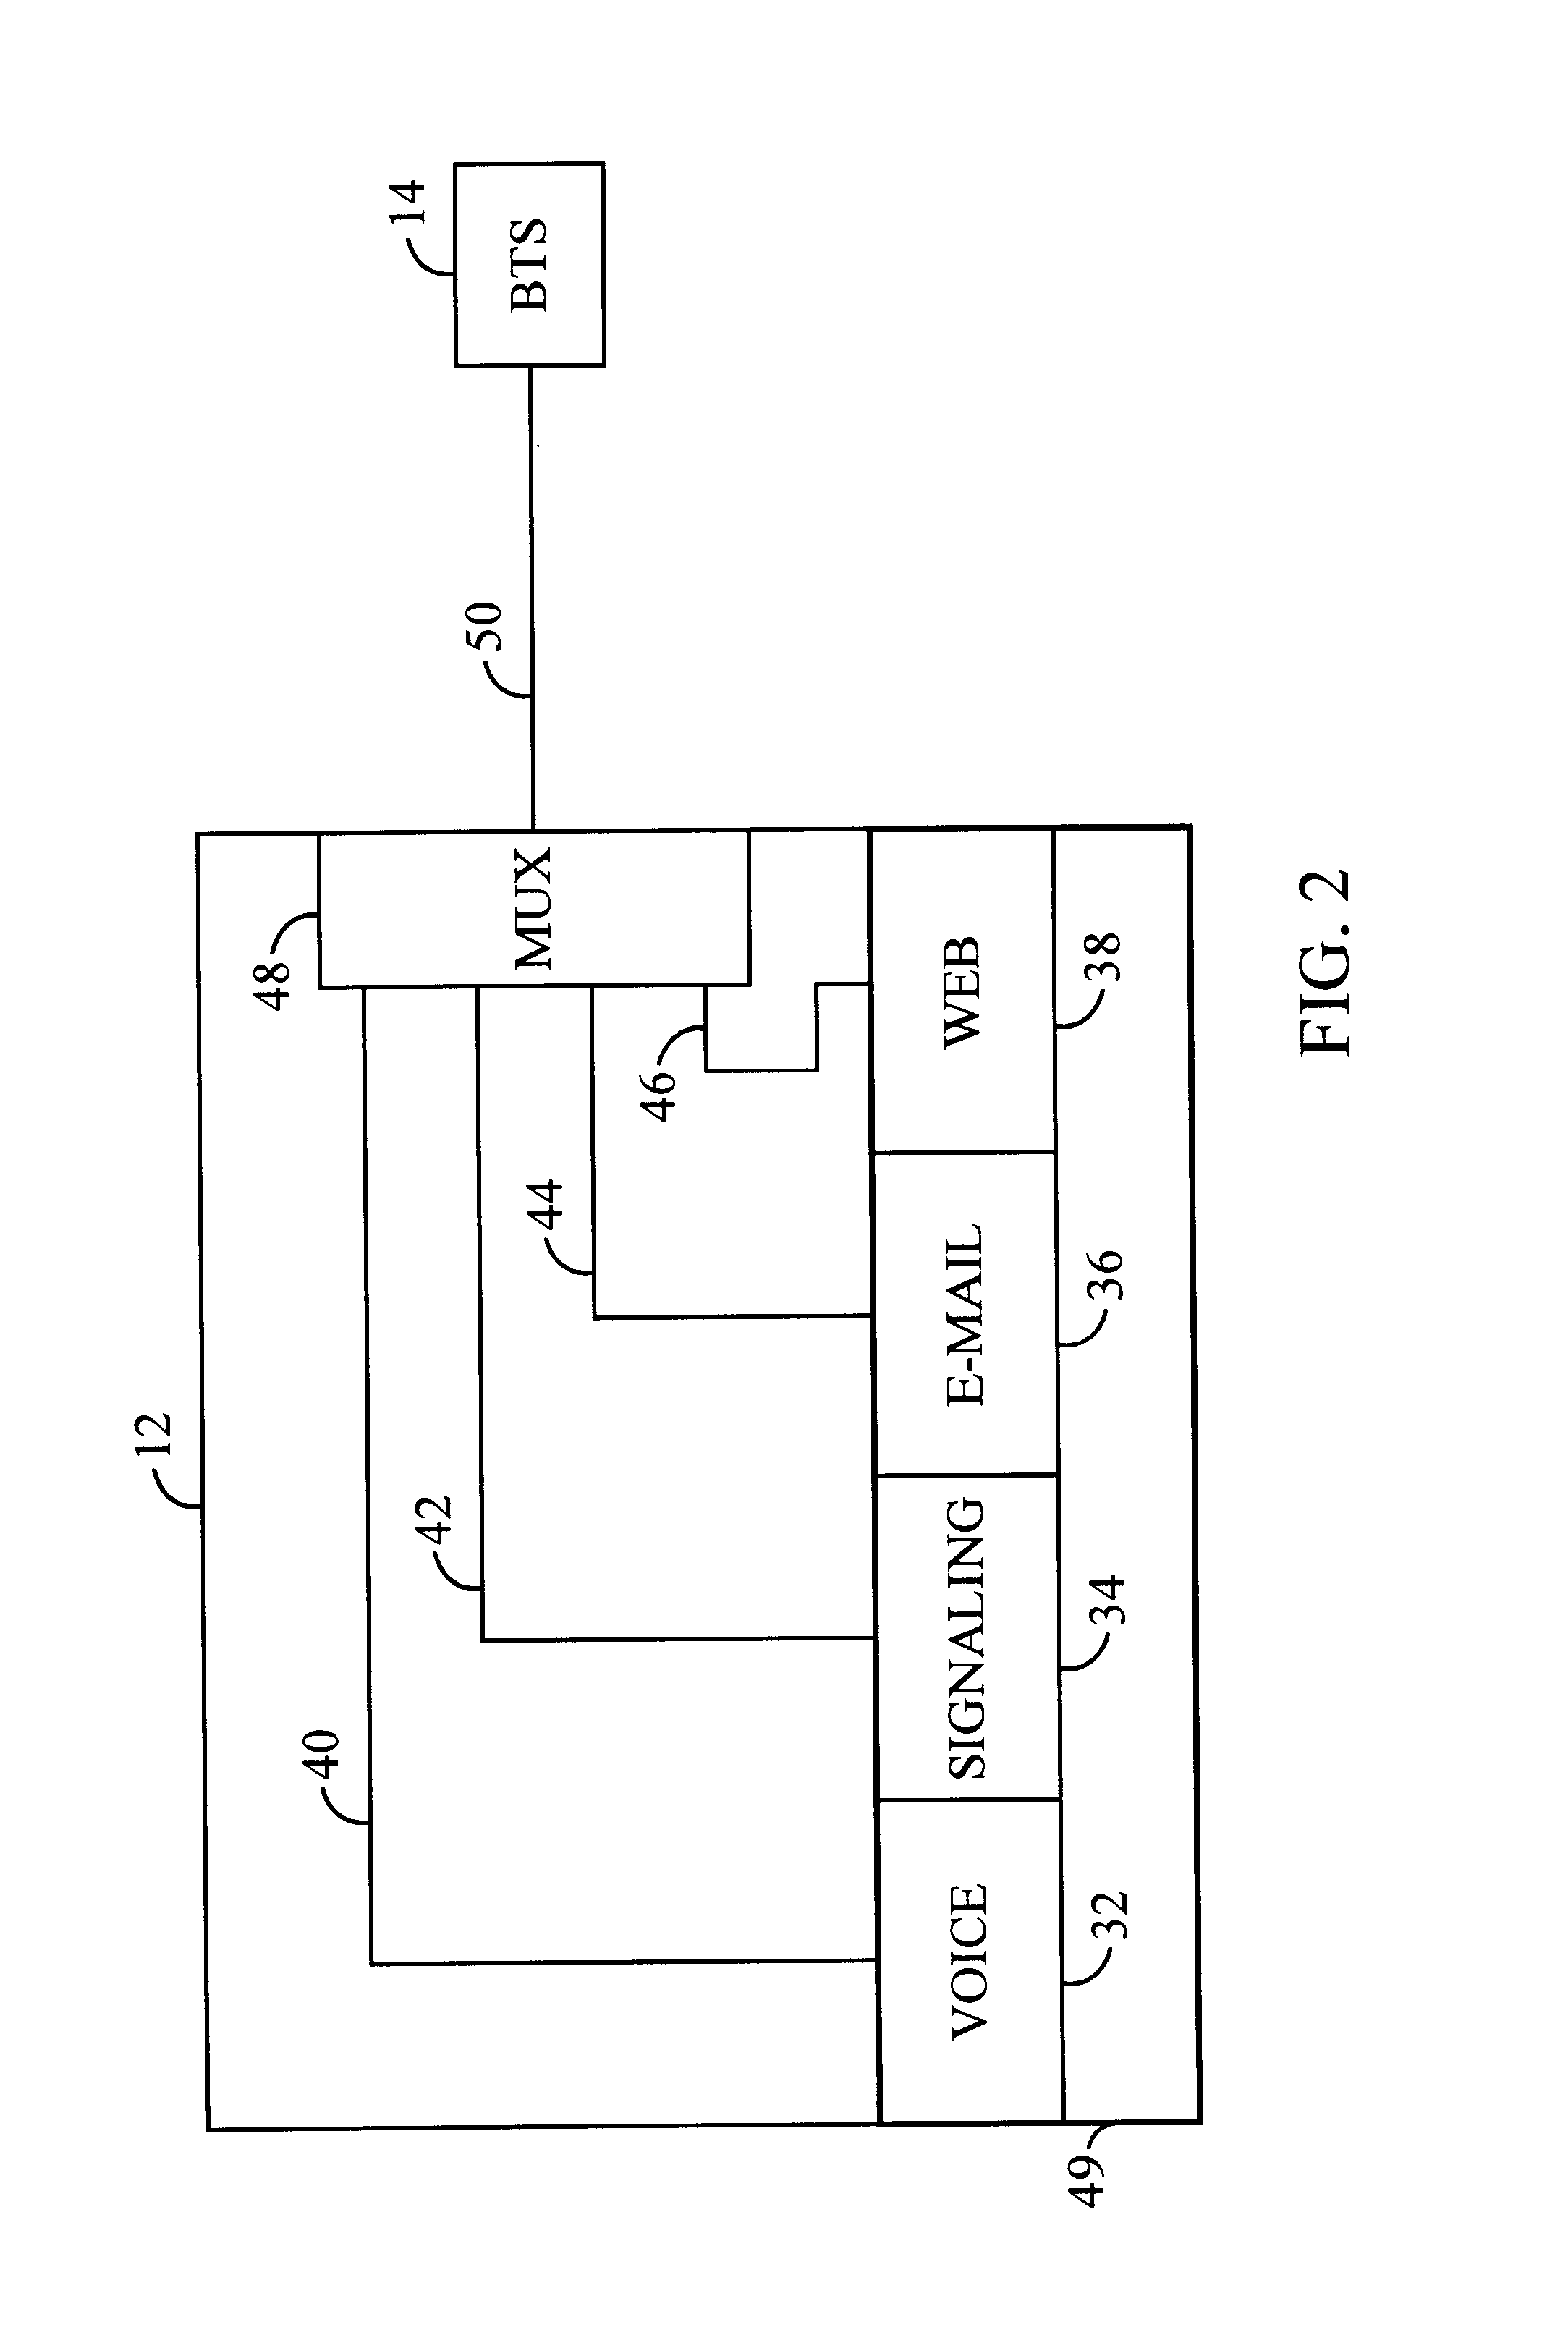 Method and apparatus for proportionately multiplexing data streams onto one data stream